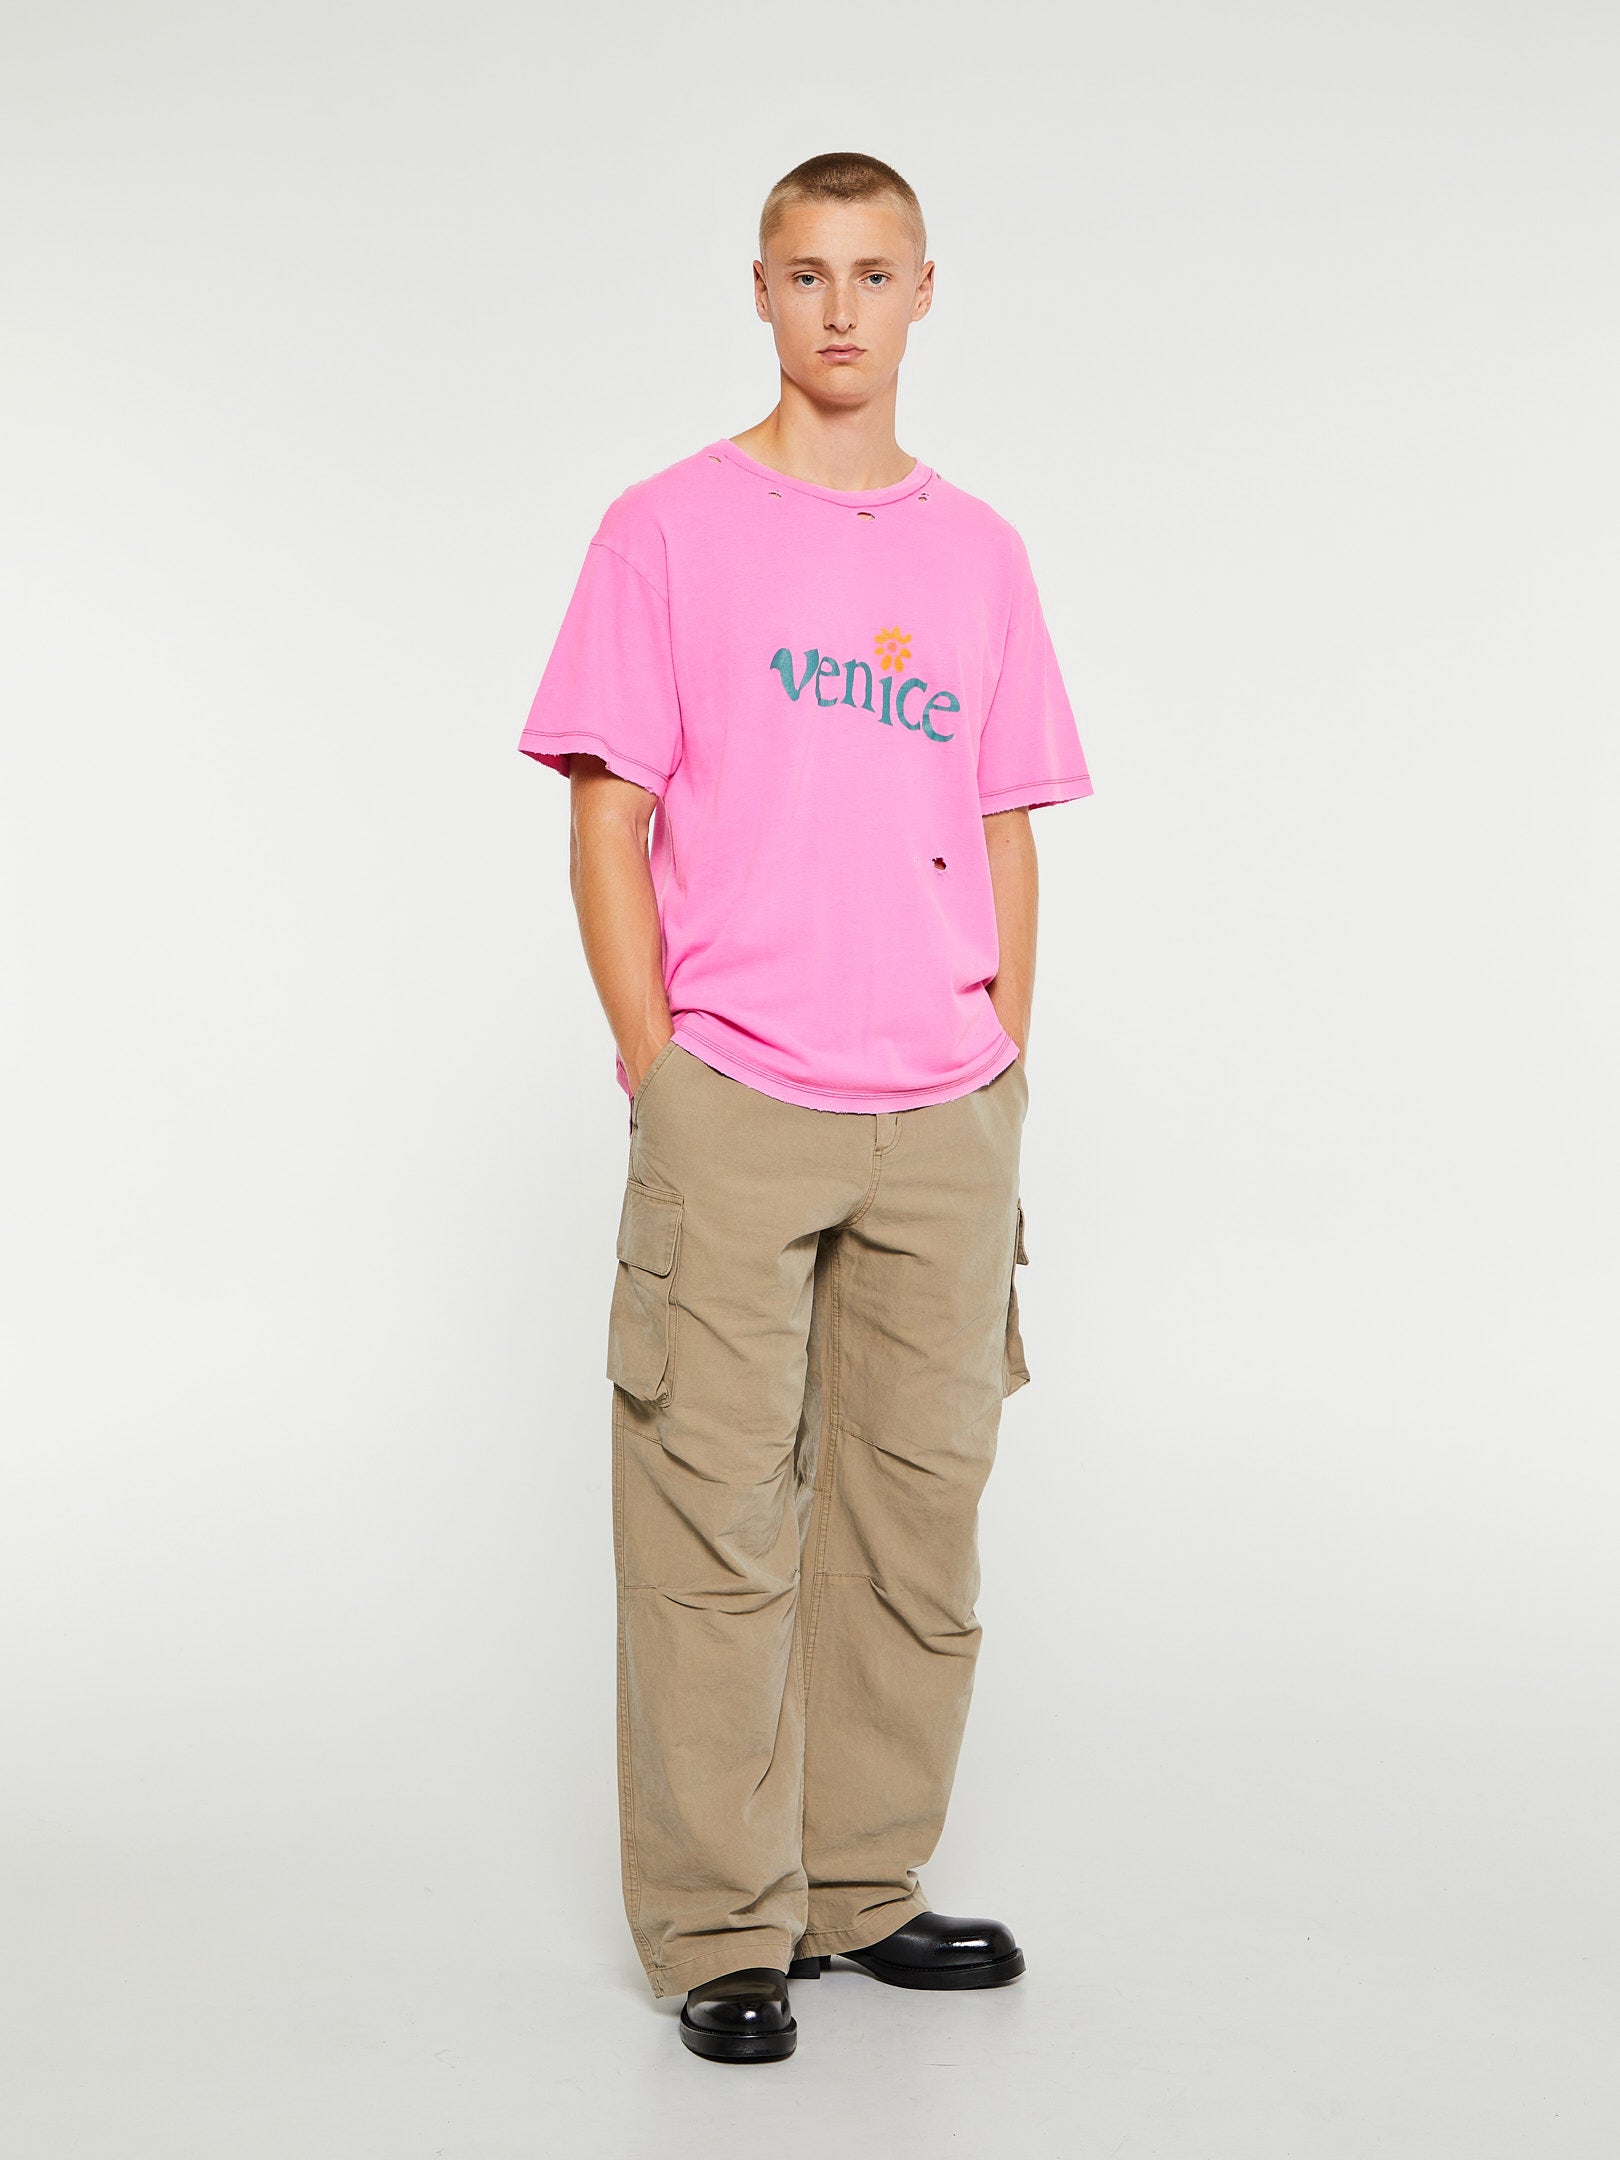 Venice T-Shirt in Pink